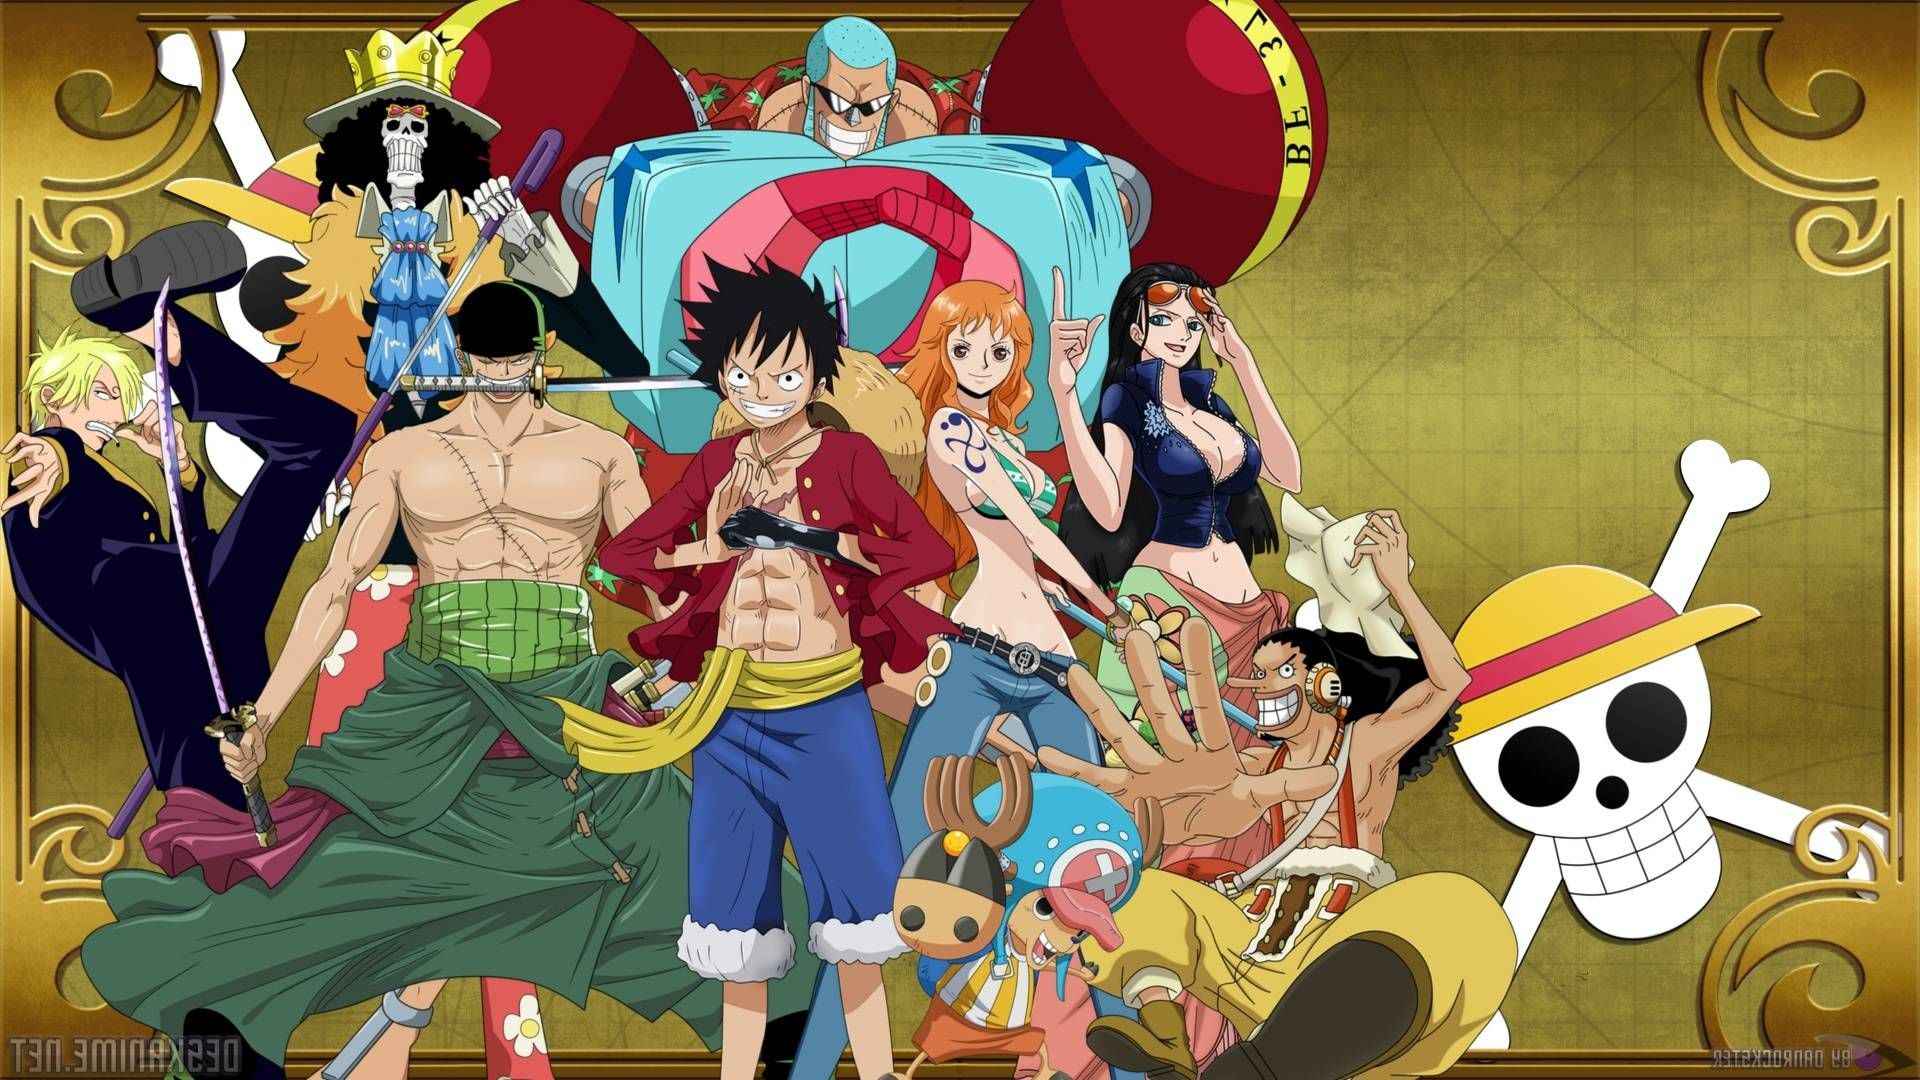 Wallpaper One Piece 1920x1080 Pin On Onepiece One Piece HD Wallpaper 37210 Baltana One Piece HD Wallpap. One piece wallpaper iphone, HD anime wallpaper, Anime